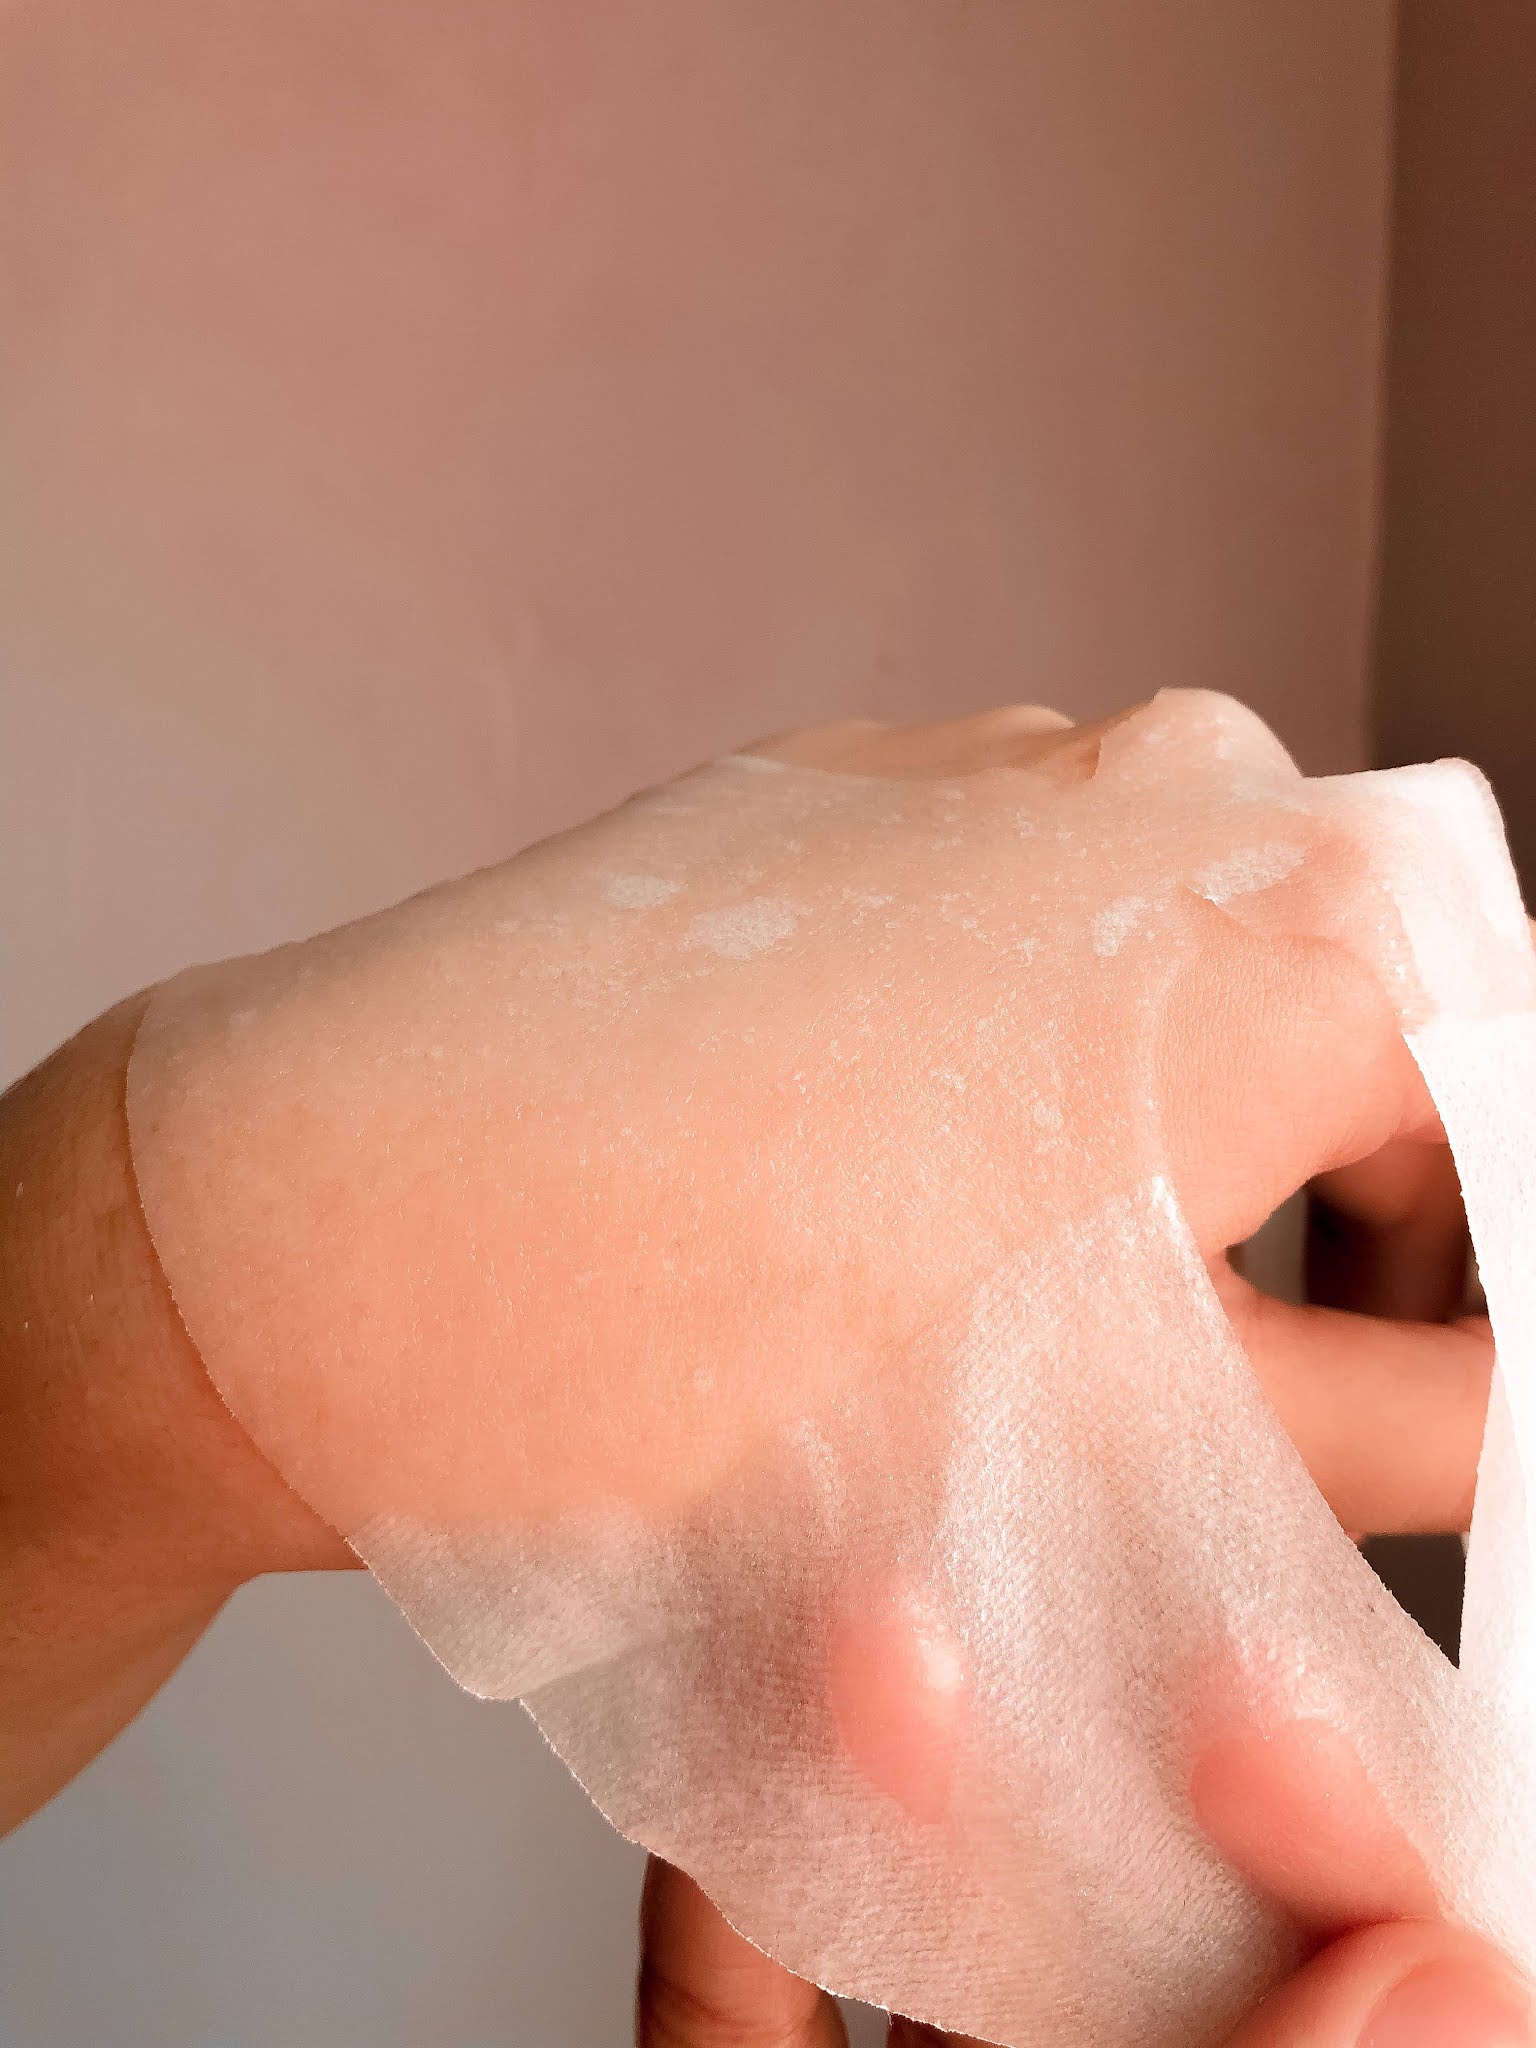 Dry and Dull Skin: Follow These 11 Steps To Rejuvenate It!